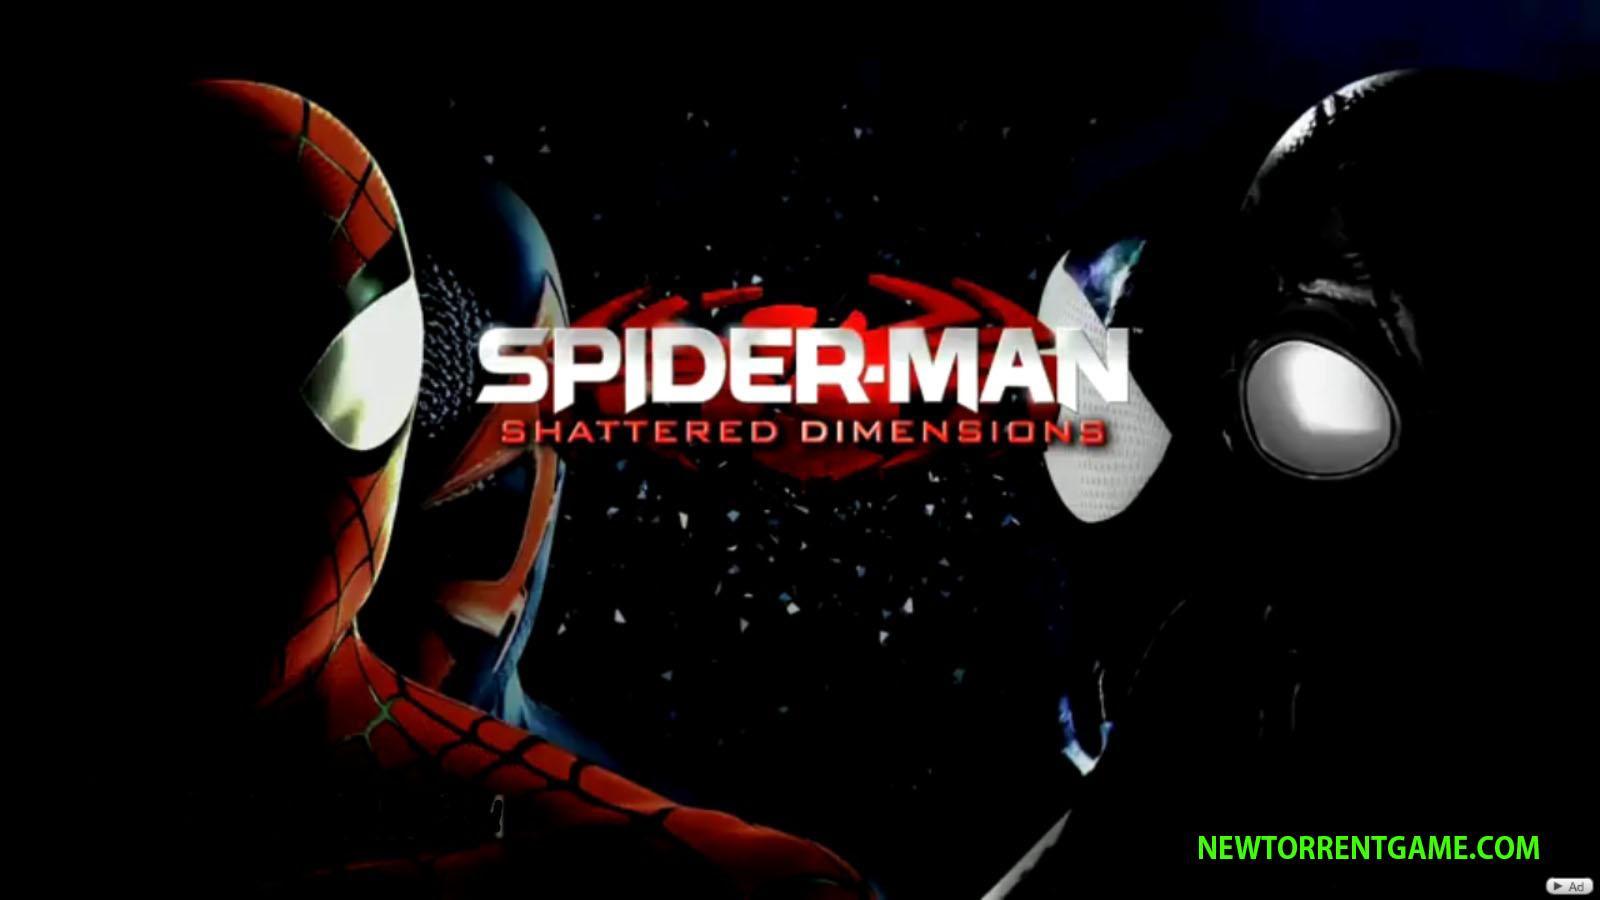 spider-man shattered dimensions highly compressed in 10mb